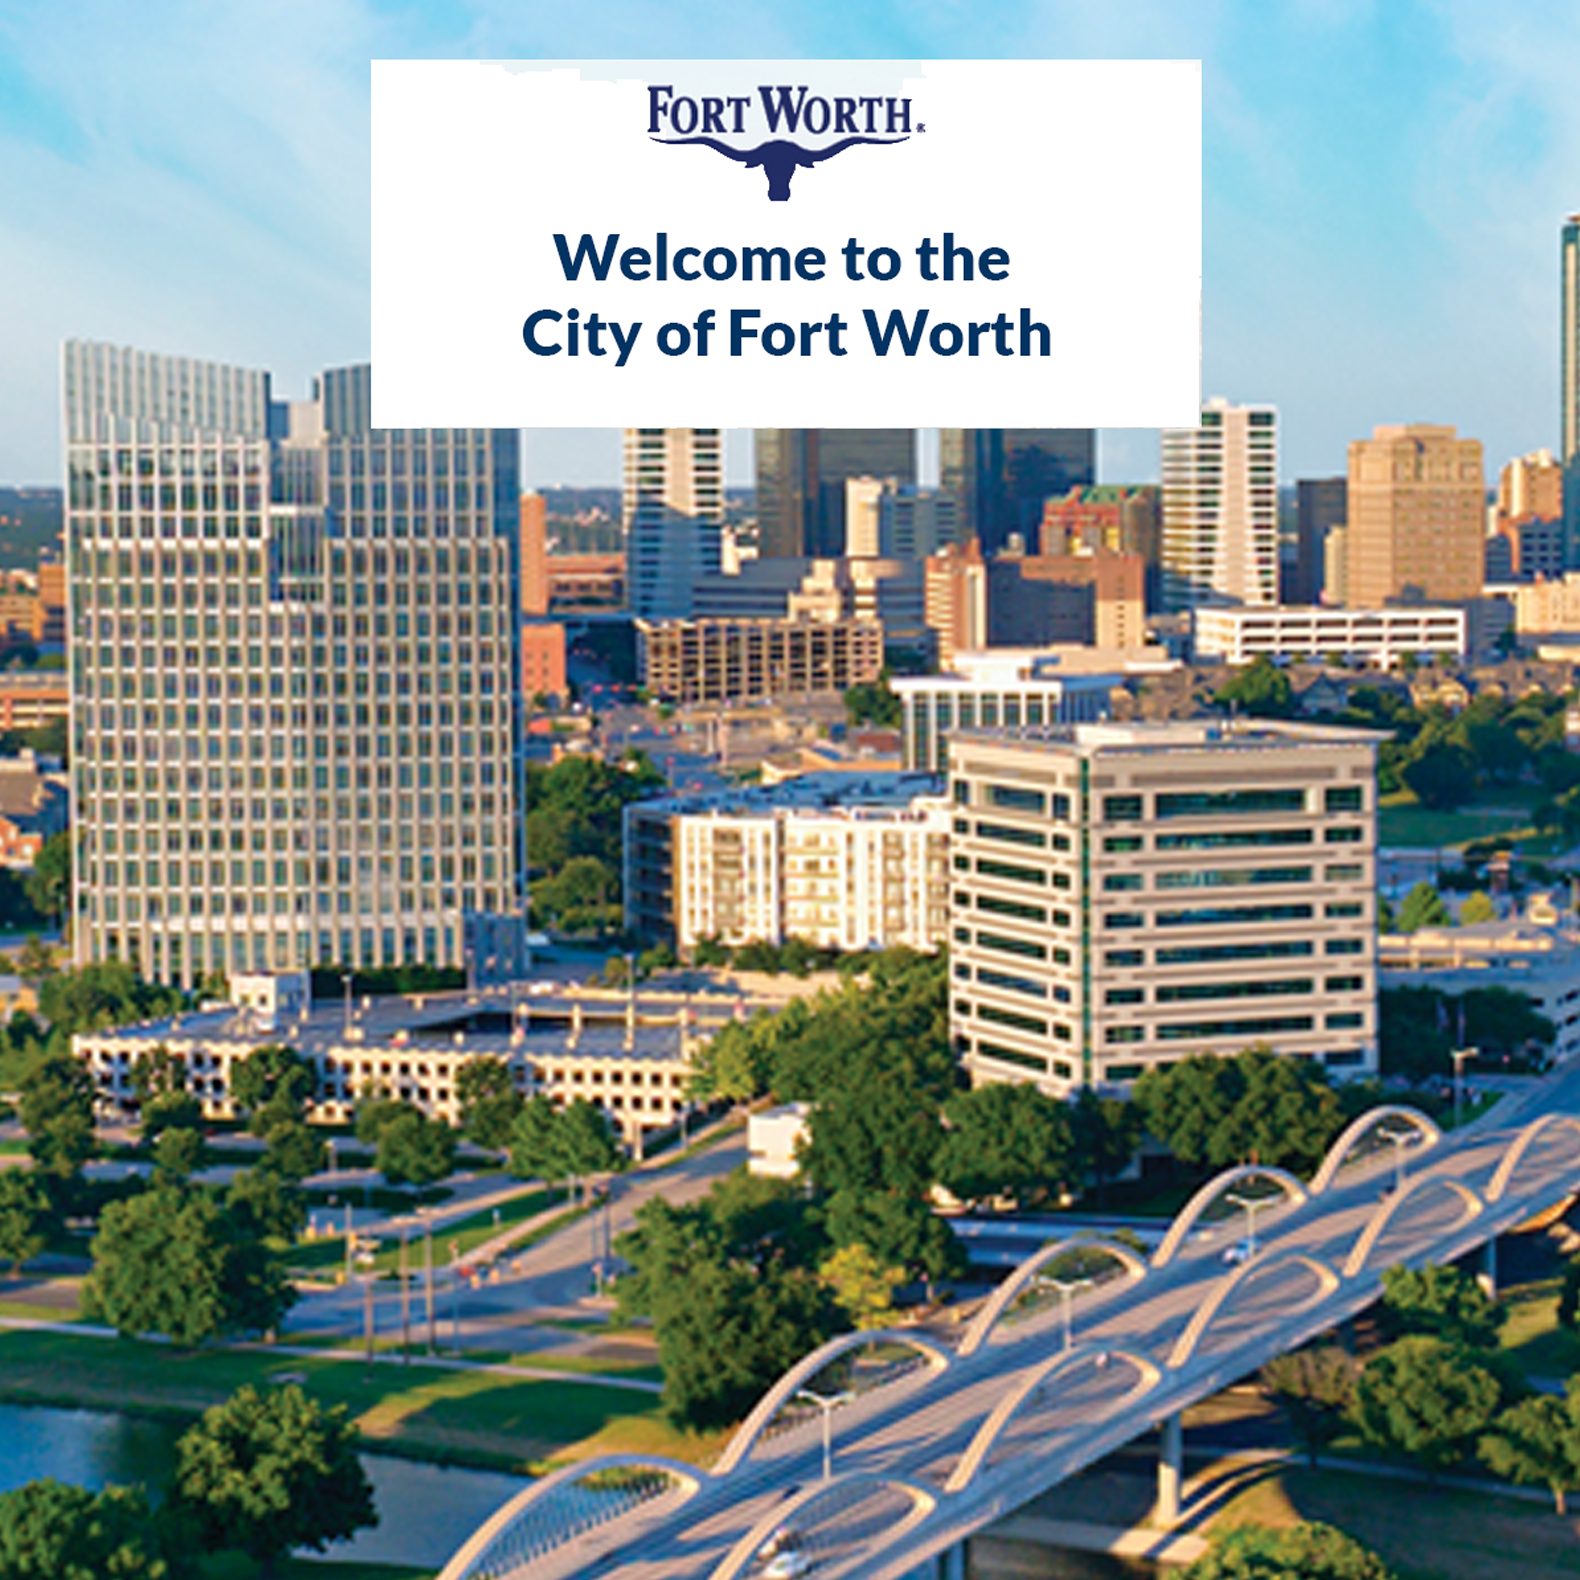 Welcome to the City of Fort Worth